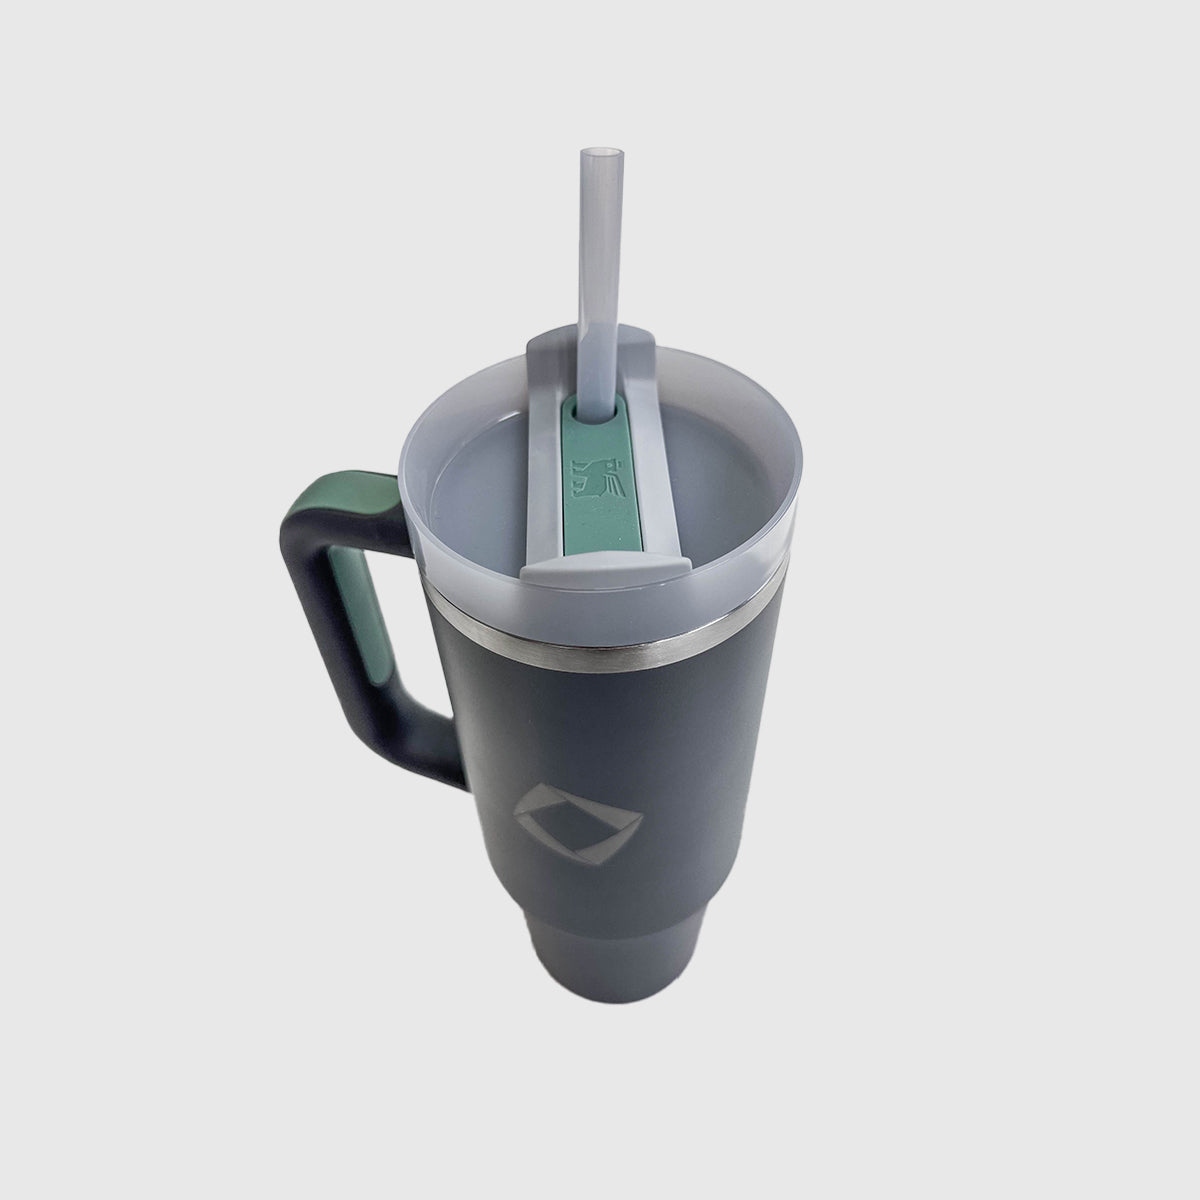  Stanley Quencher H2.0 FlowState Vacuum Mug with